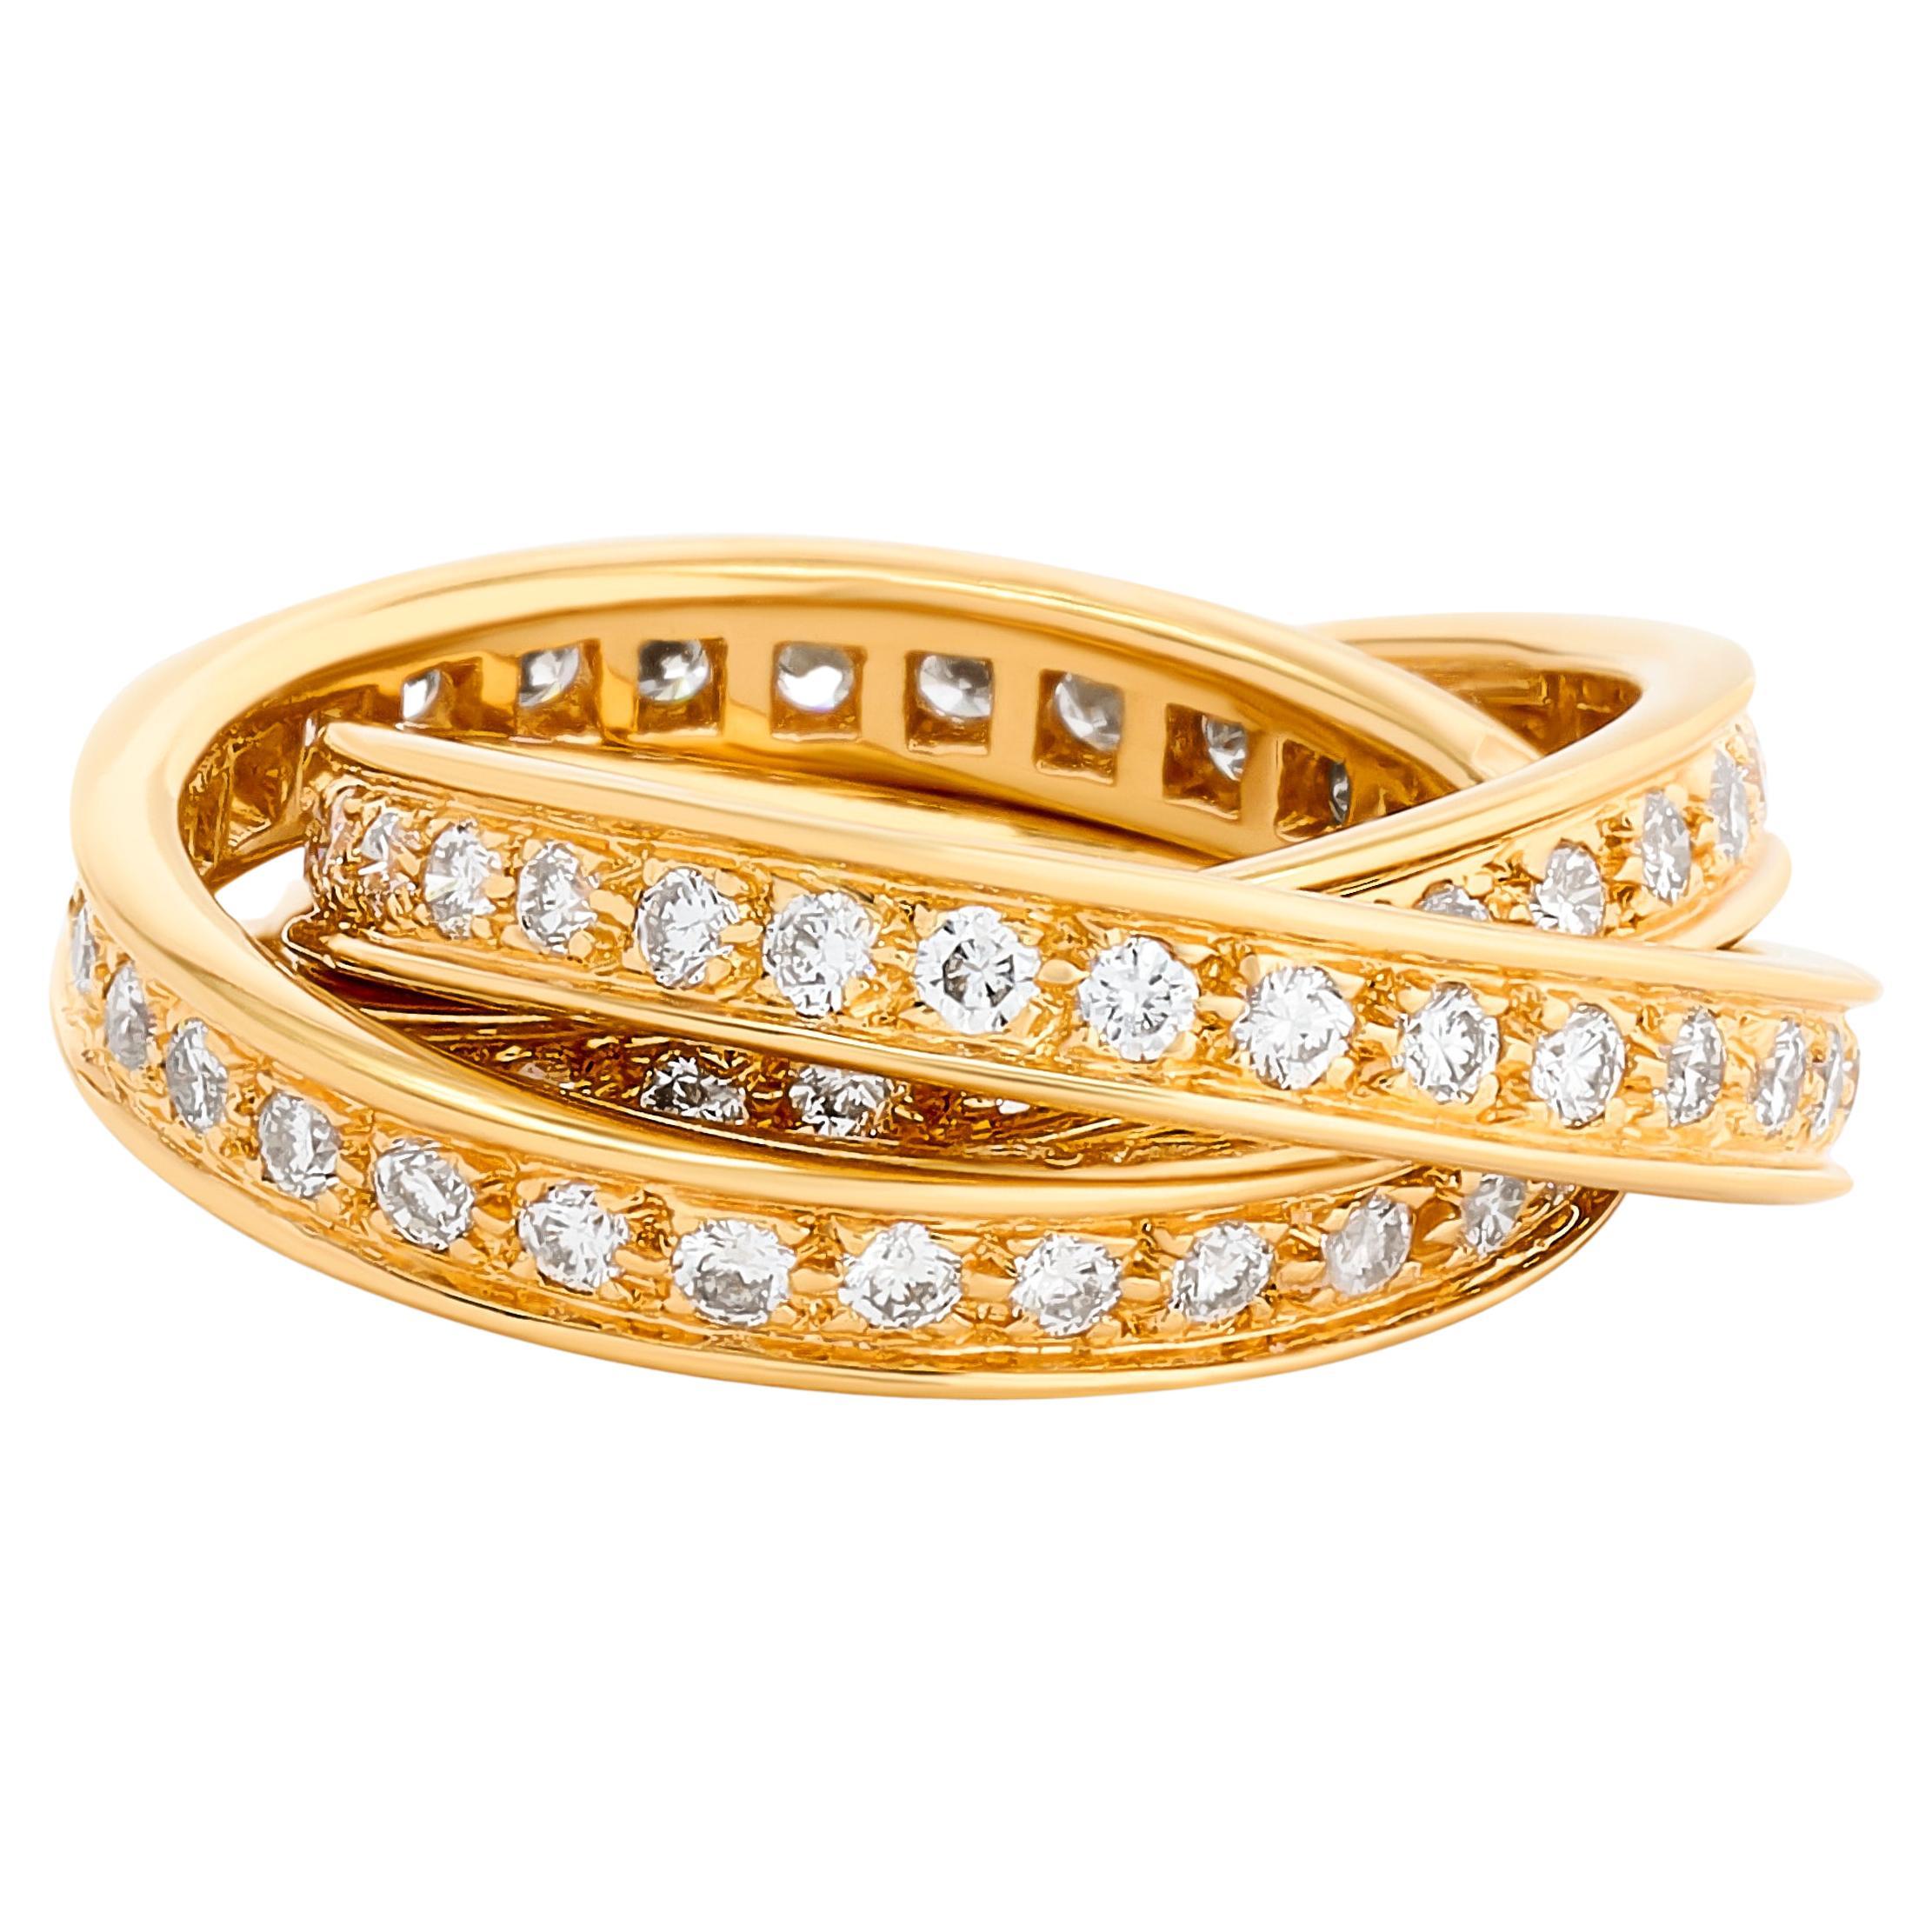 Cartier Classic Modell Diamant Trinity Rolling Ring in 18k Gelbgold im Angebot